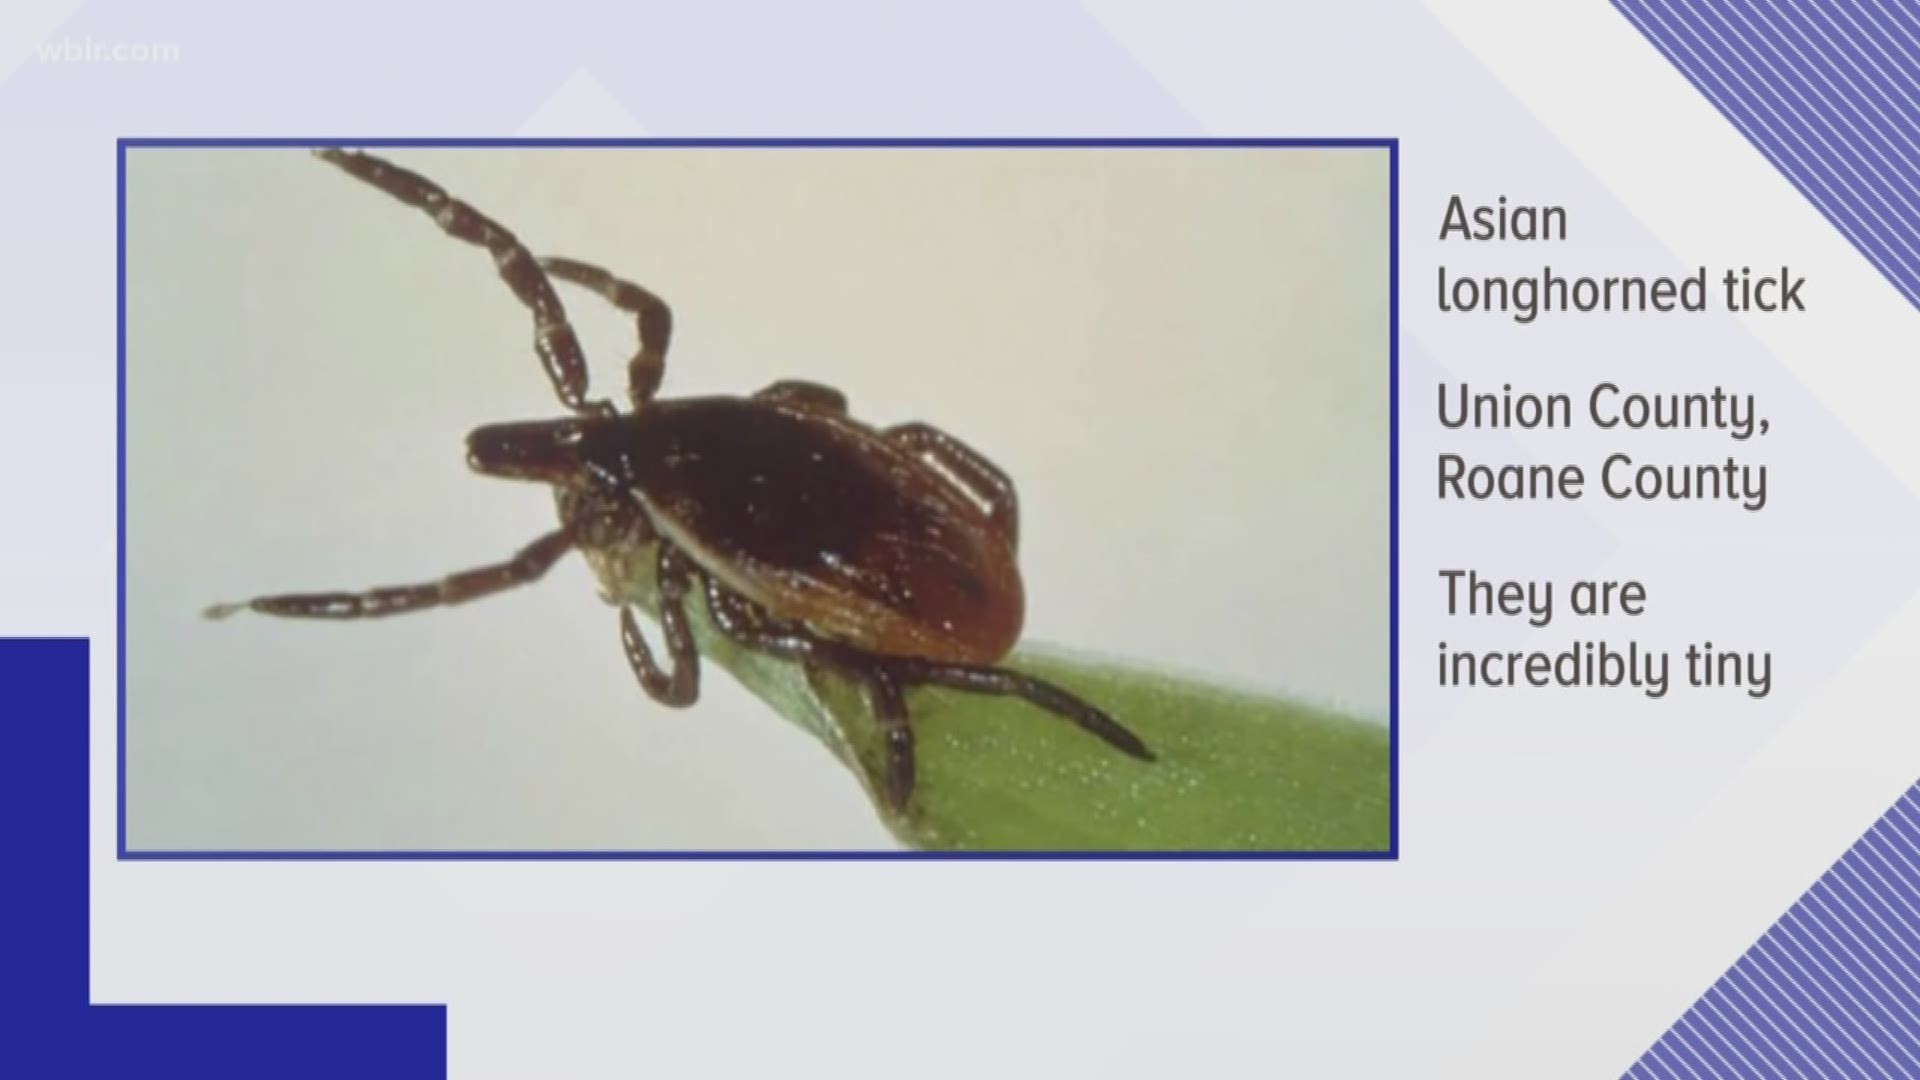 The Department of Agriculture said the Asian longhorned tick has now spread to East Tennessee after several were found on animals in Union and Roane counties.